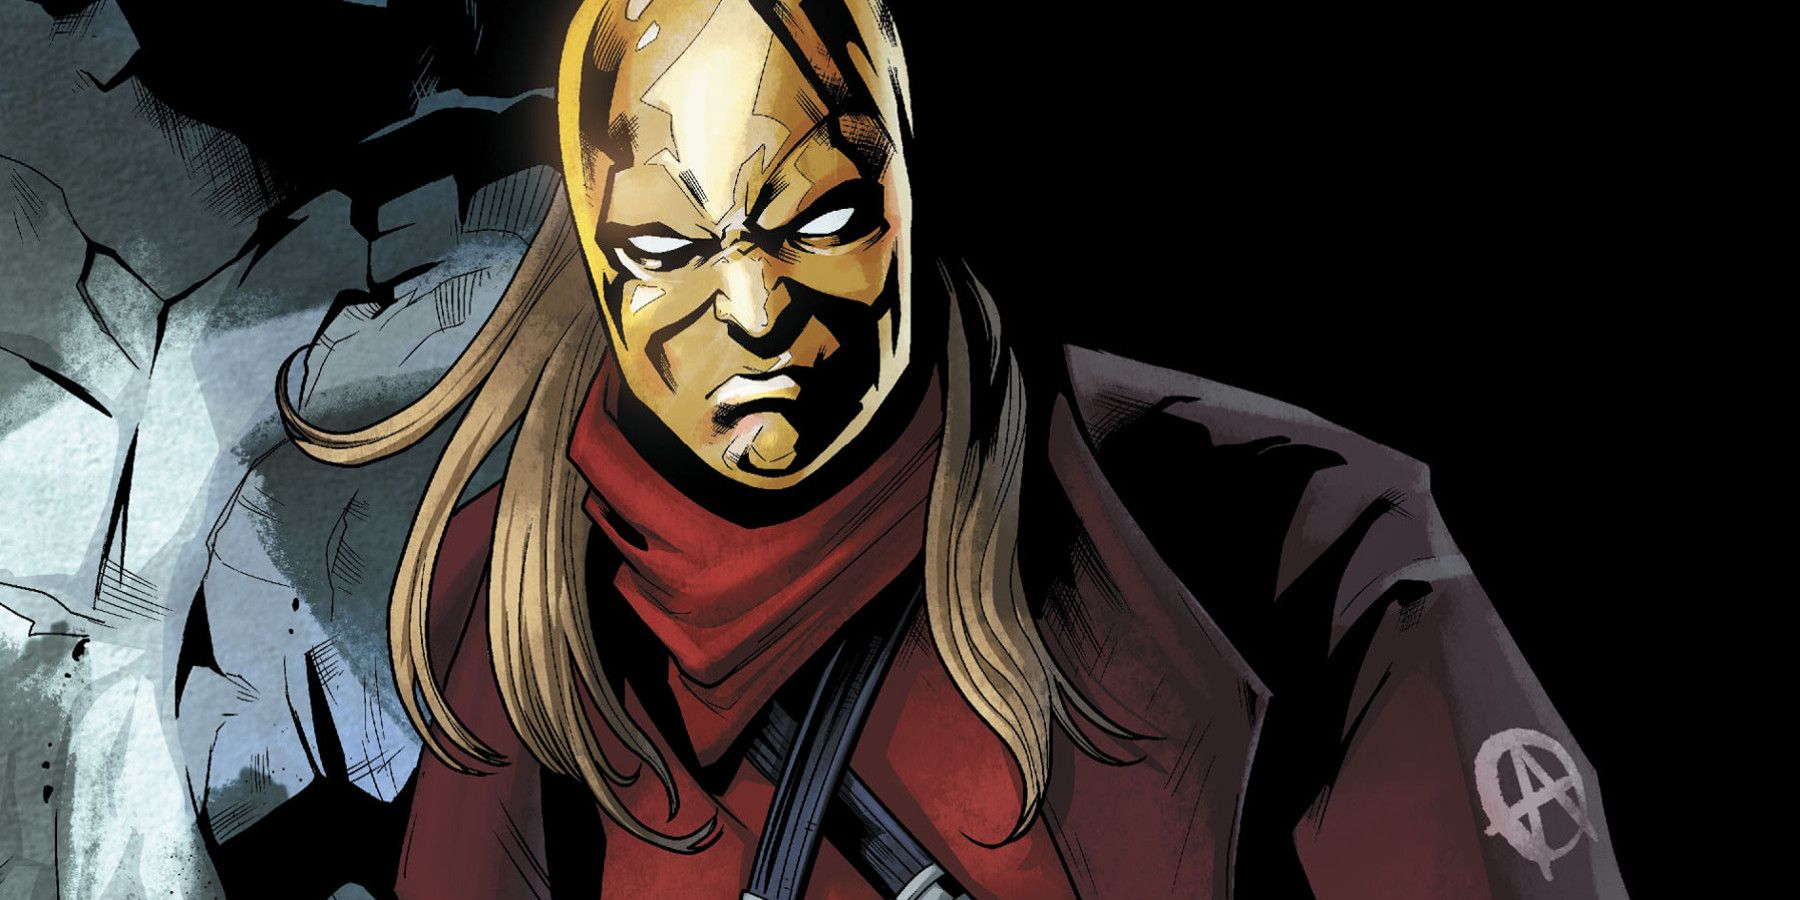 Anarky wearing his costume in the comics.